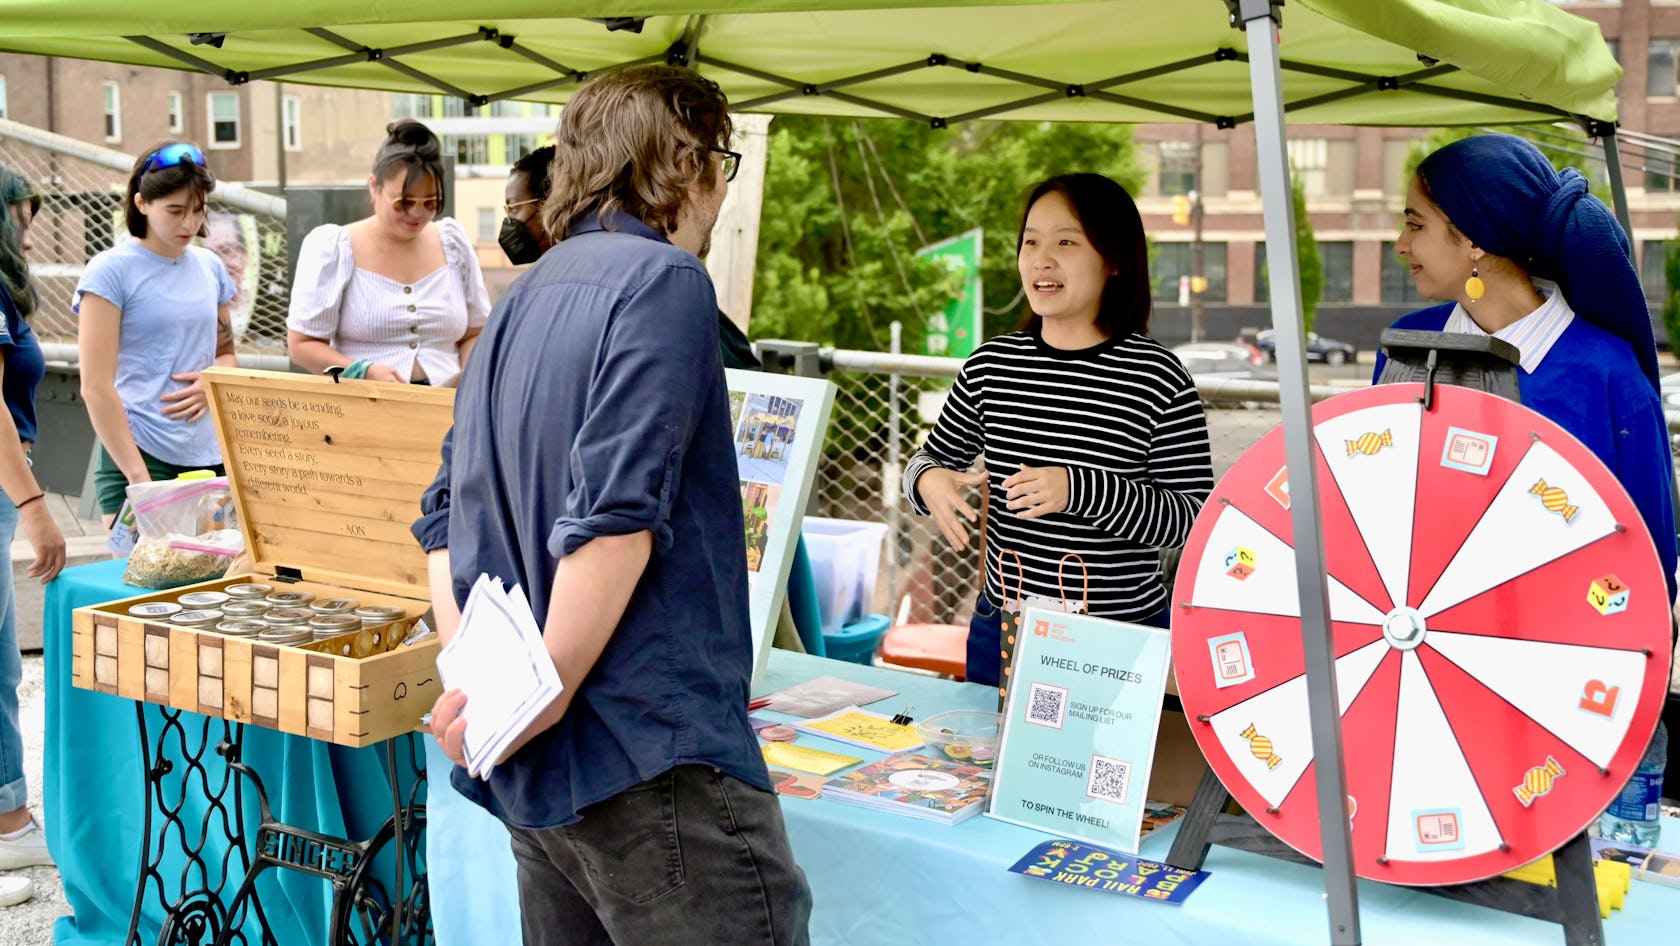 Representatives from Asian Arts Initiative talk to visitors at an event at the Rail Park